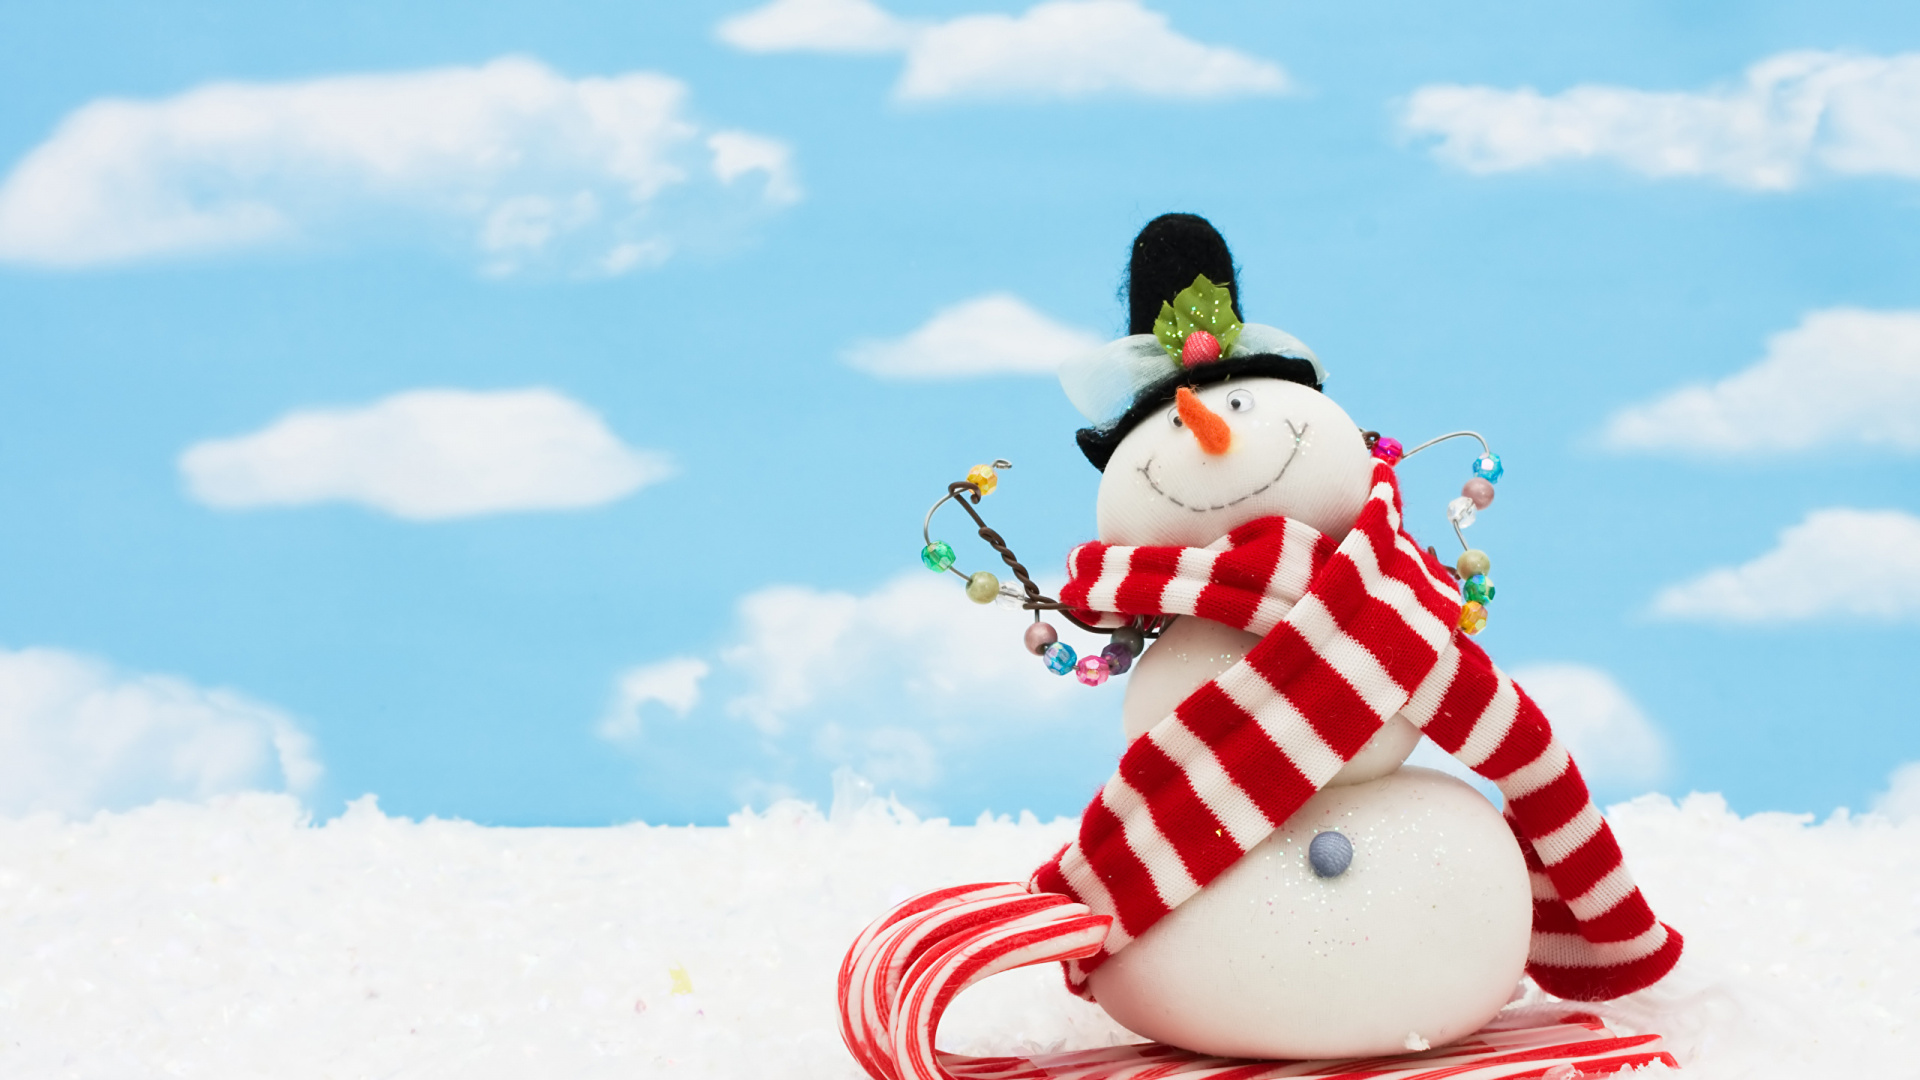 Snowman, Christmas Day, Snow, Christmas, Winter. Wallpaper in 1920x1080 Resolution